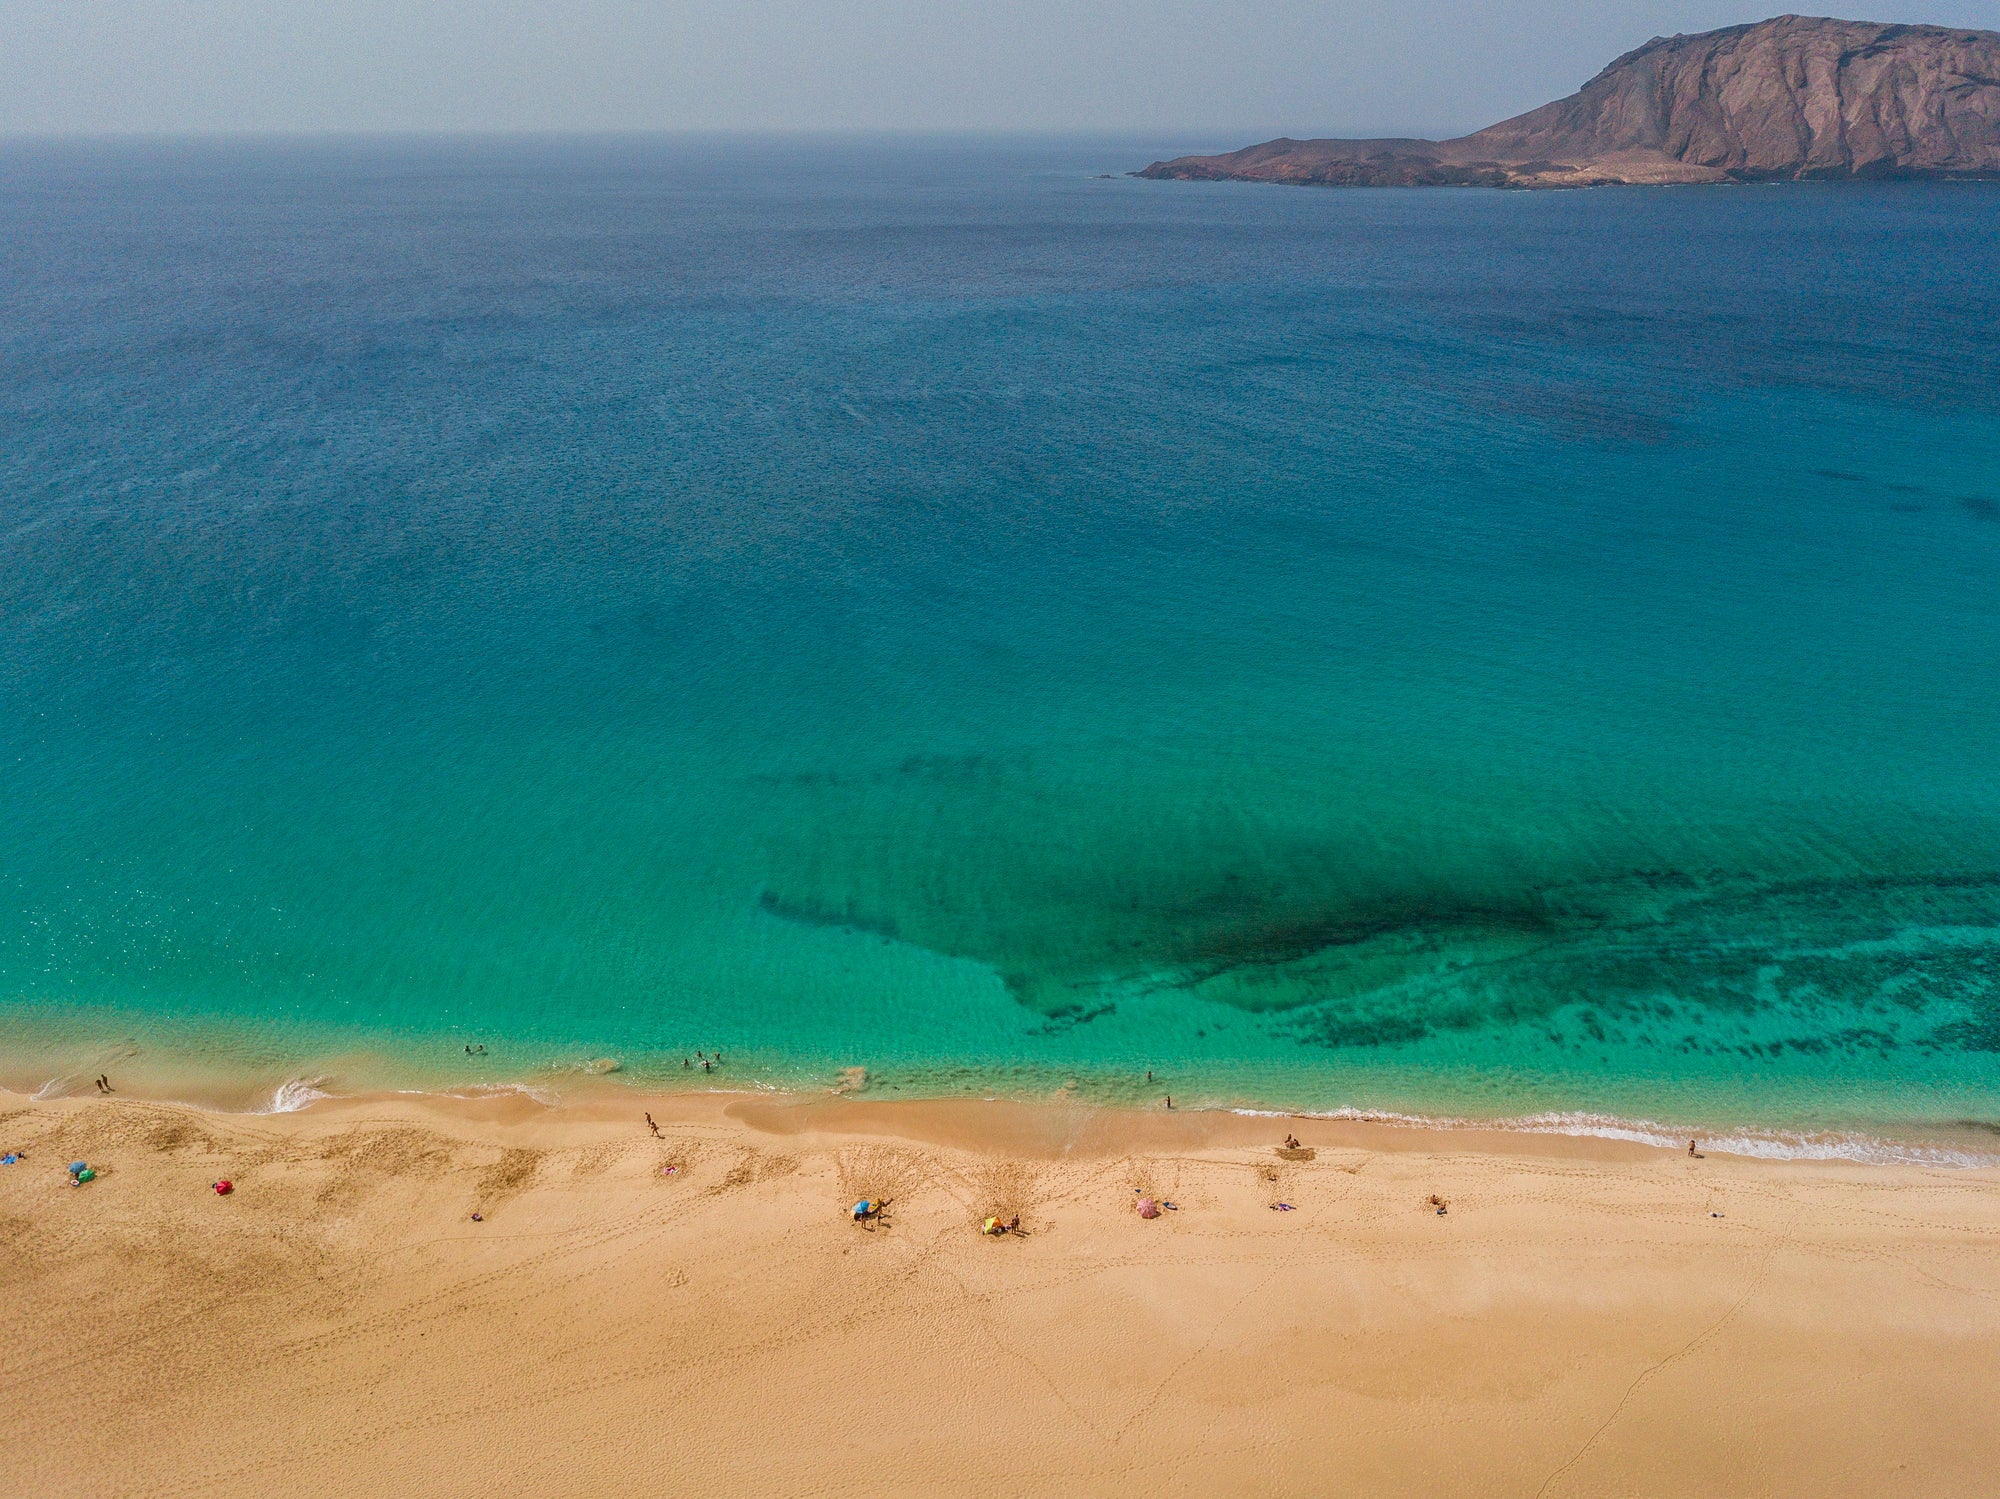 Lanzarote’s little sister, La Graciosa, is a playa paradise for simple sunning